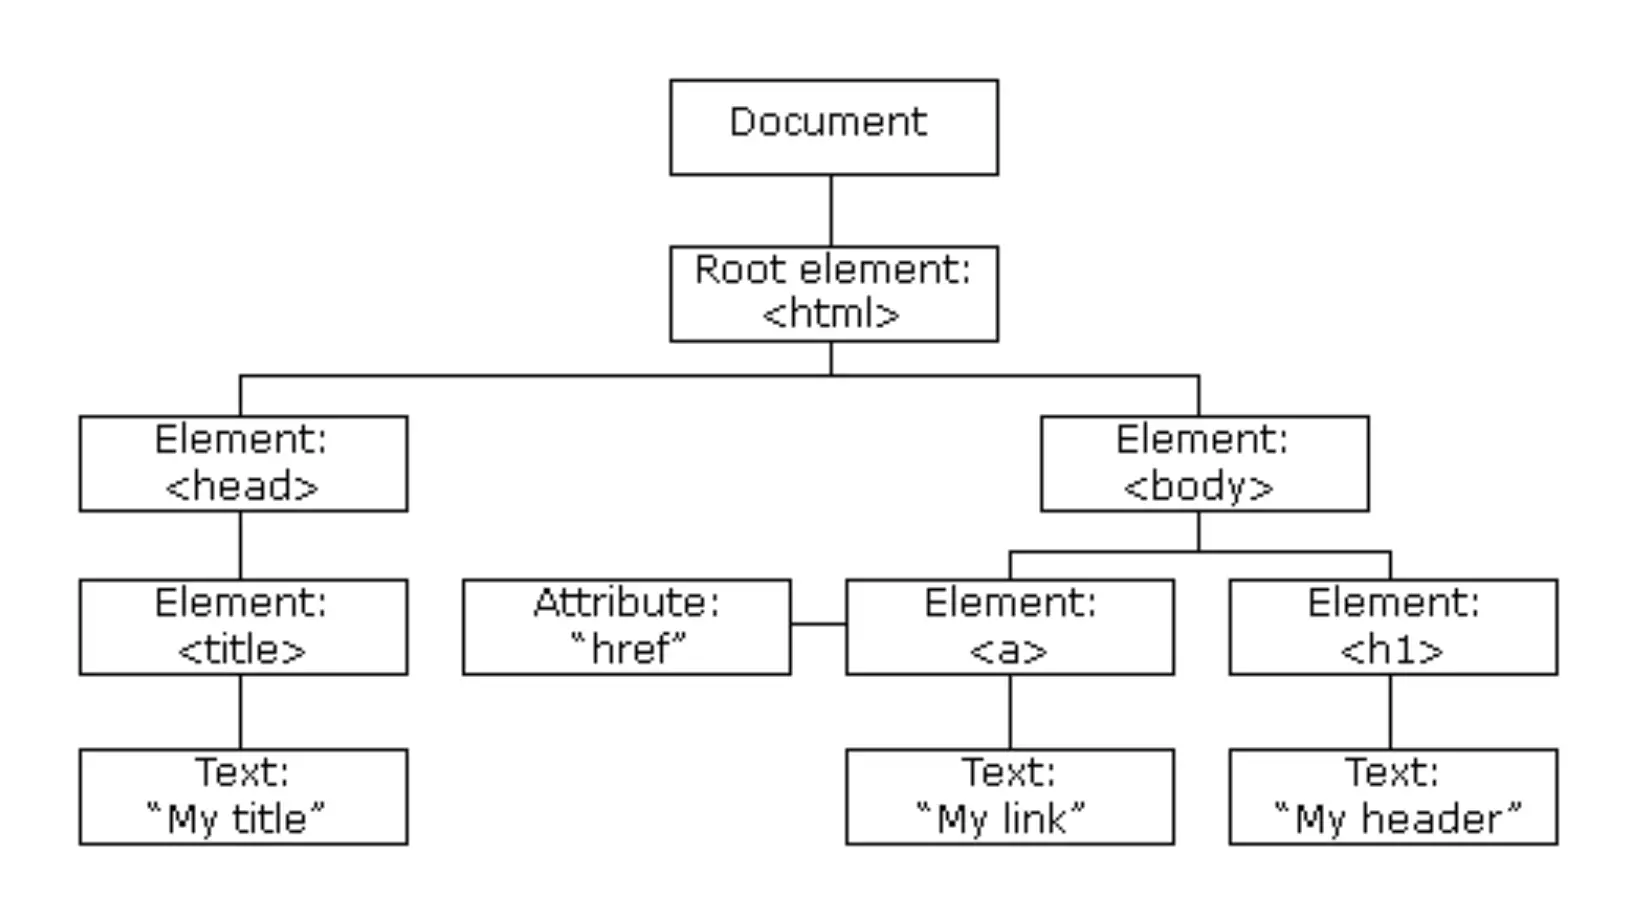 Working with DOM (Document Object Model)